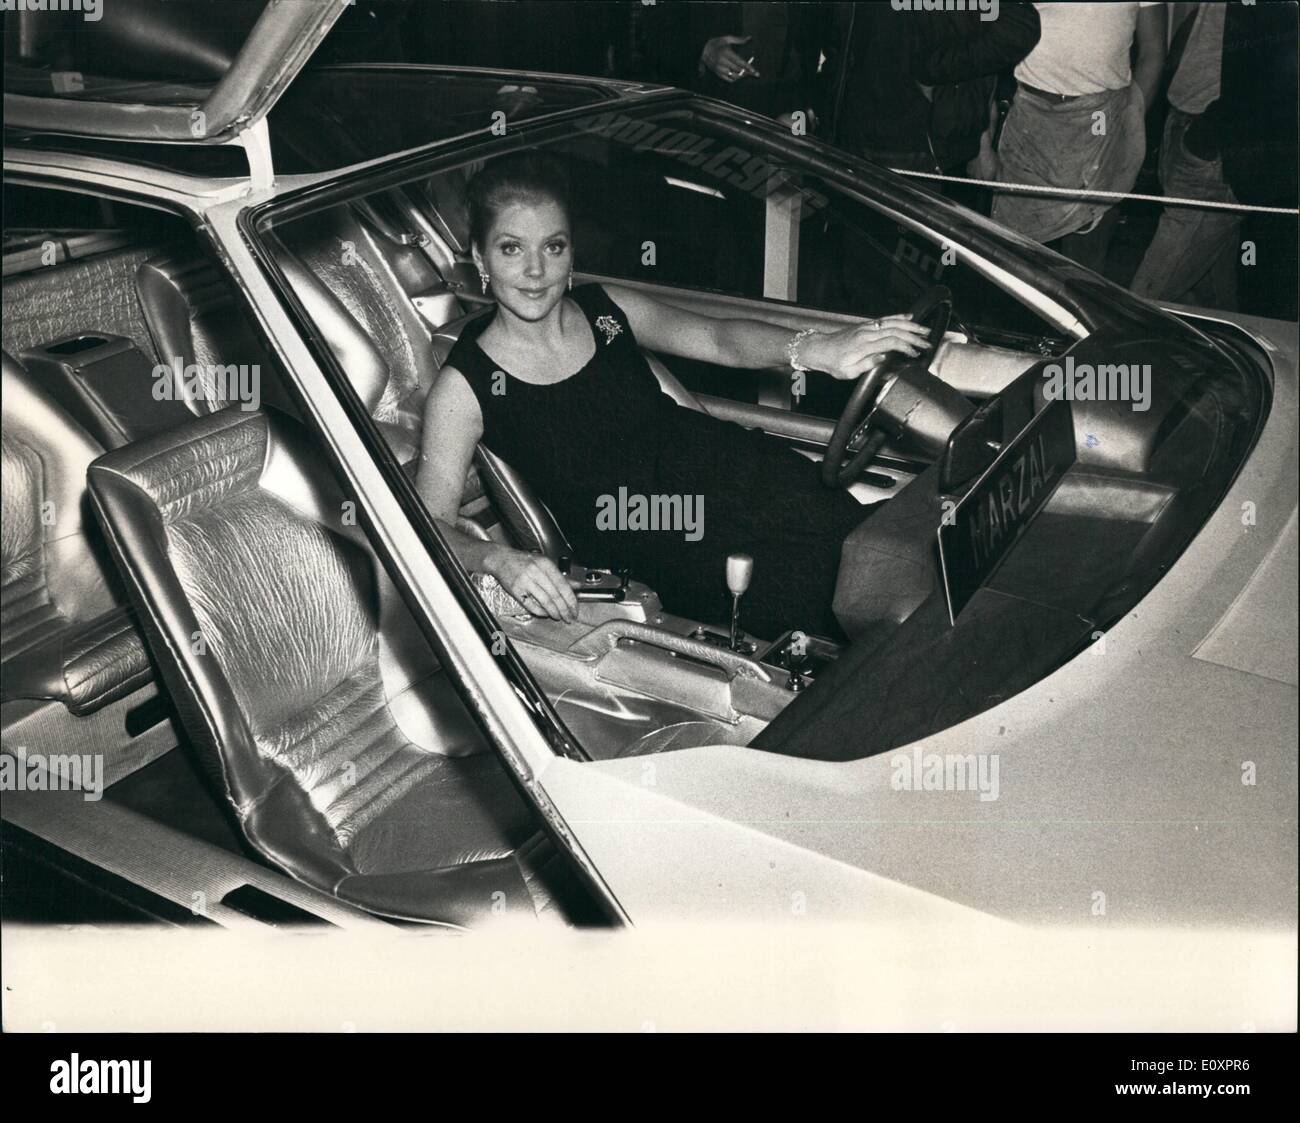 Oct. 10, 1967 - Preview of the Motor Show: Model Zandra, seen seated at the wheel of the Lamborghini Marzal the only one of its Stock Photo